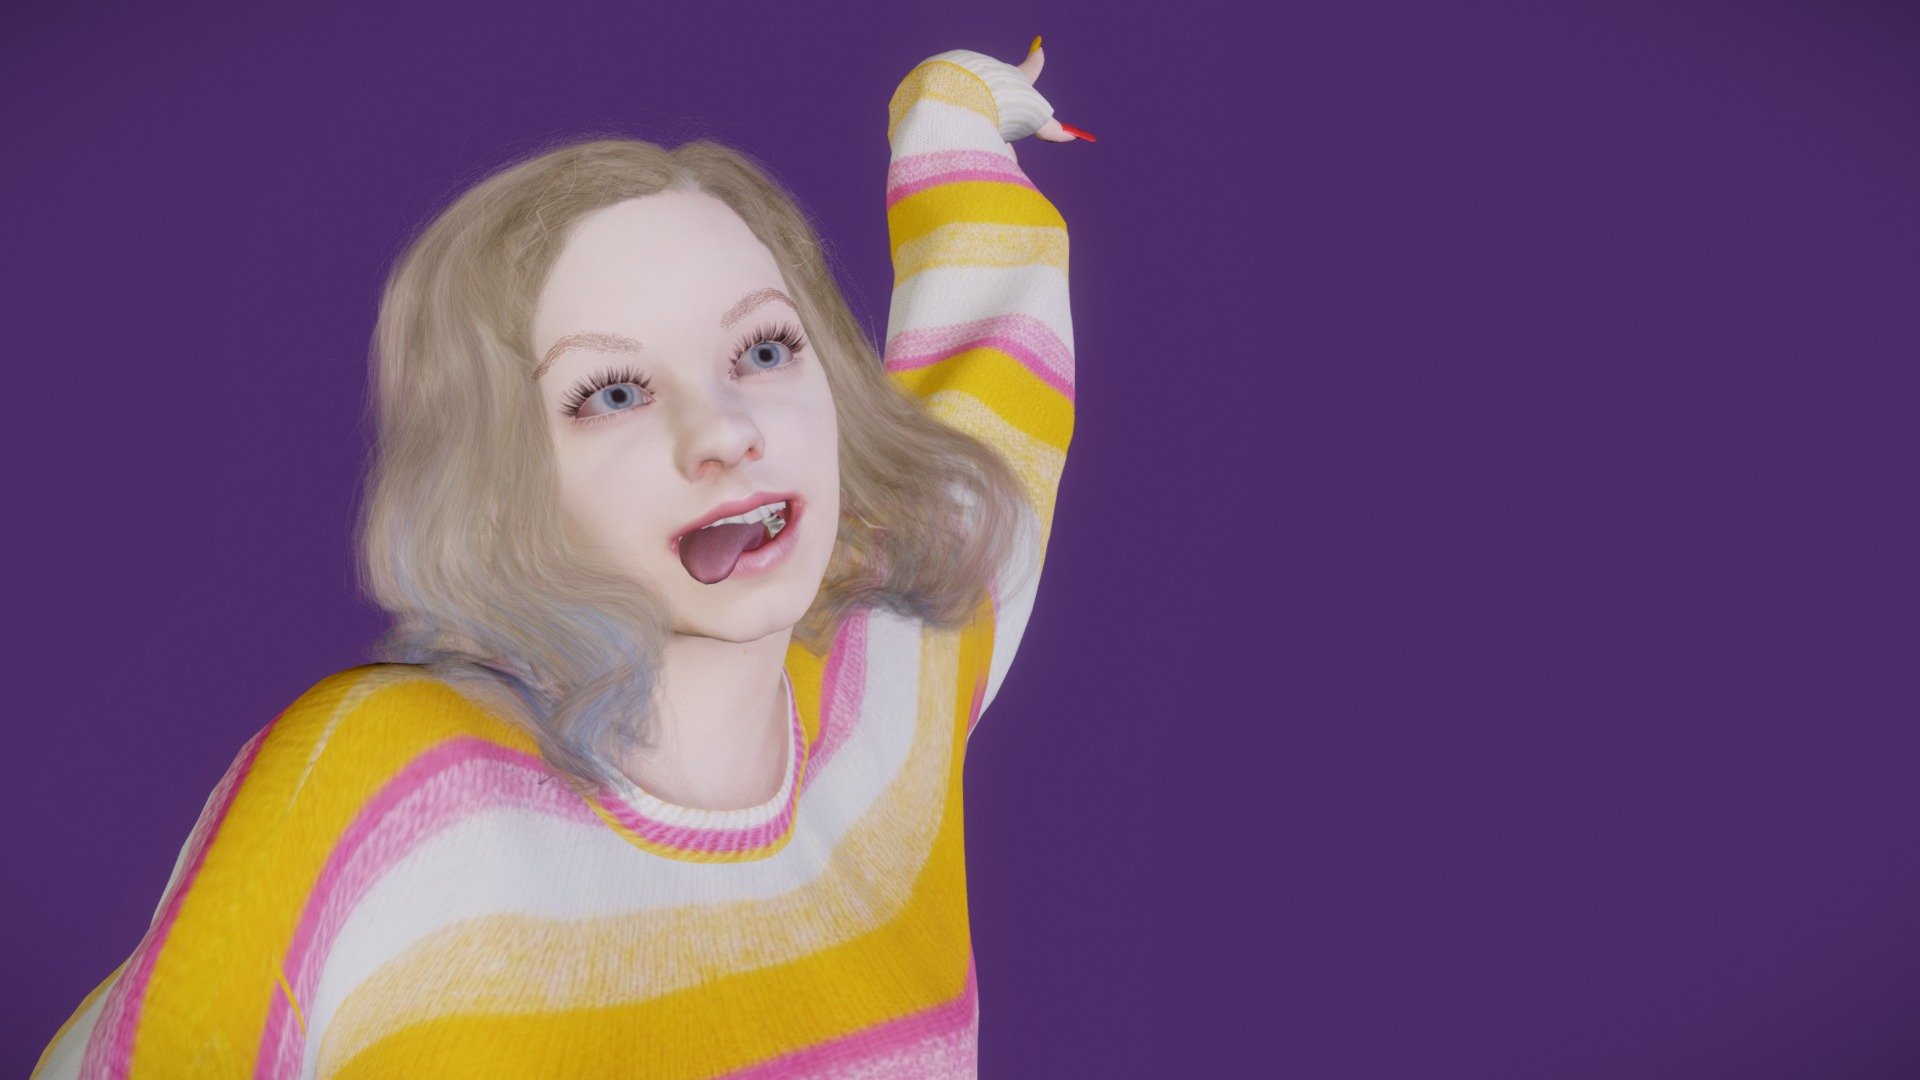 Emma Myers version.Enid Sinclair, 

She is a werewolf, from the hit tv series
Wednesday.

This one was a little challenging to make 
.I think it turned out pretty ok tho :) - Enid Sinclair - 3D model by Darkkova (@Darkinfokova) 3d model